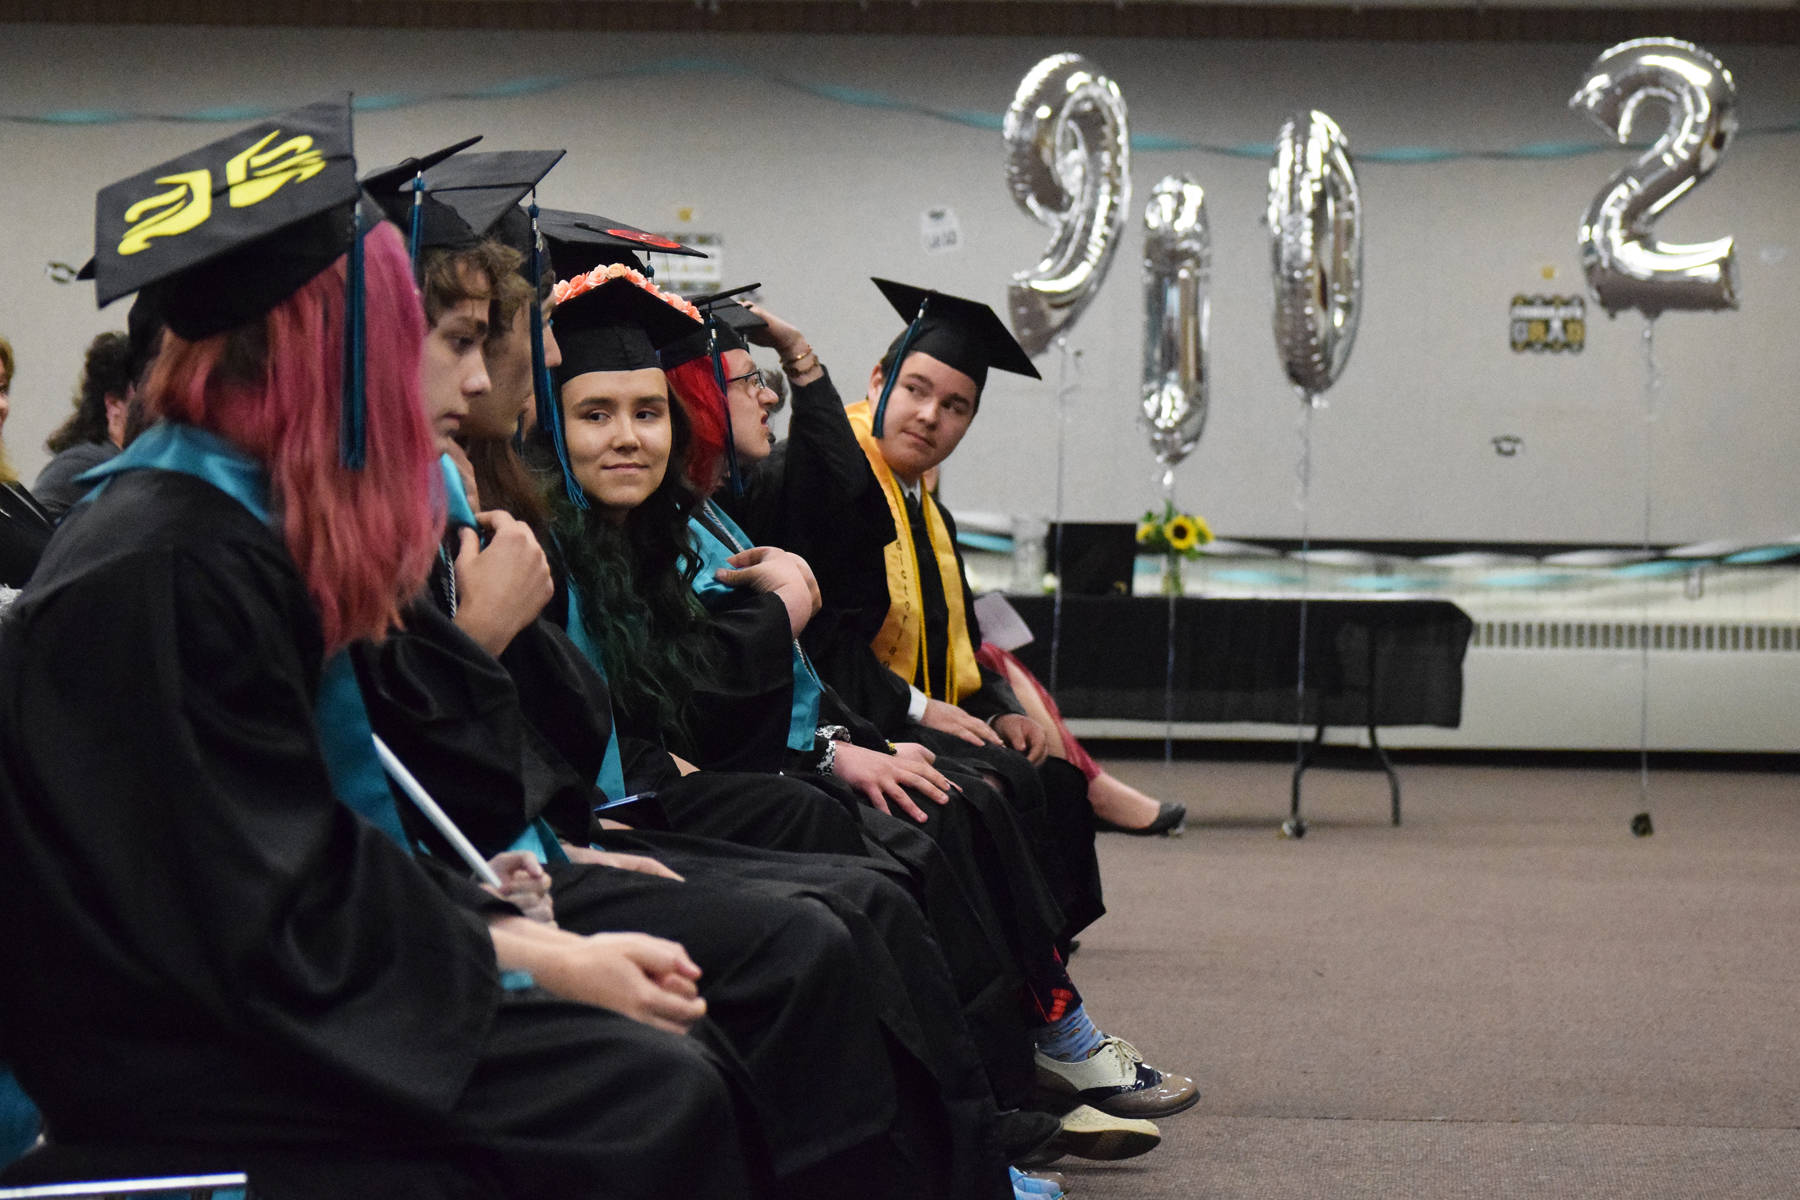 The River City Academy class of 2019 awaits the walking ceremony Tuesday, May 21, 2019, at the Soldotna Regional Sports Complex in Soldotna, Alaska. (Photo by Joey Klecka/Peninsula Clarion)